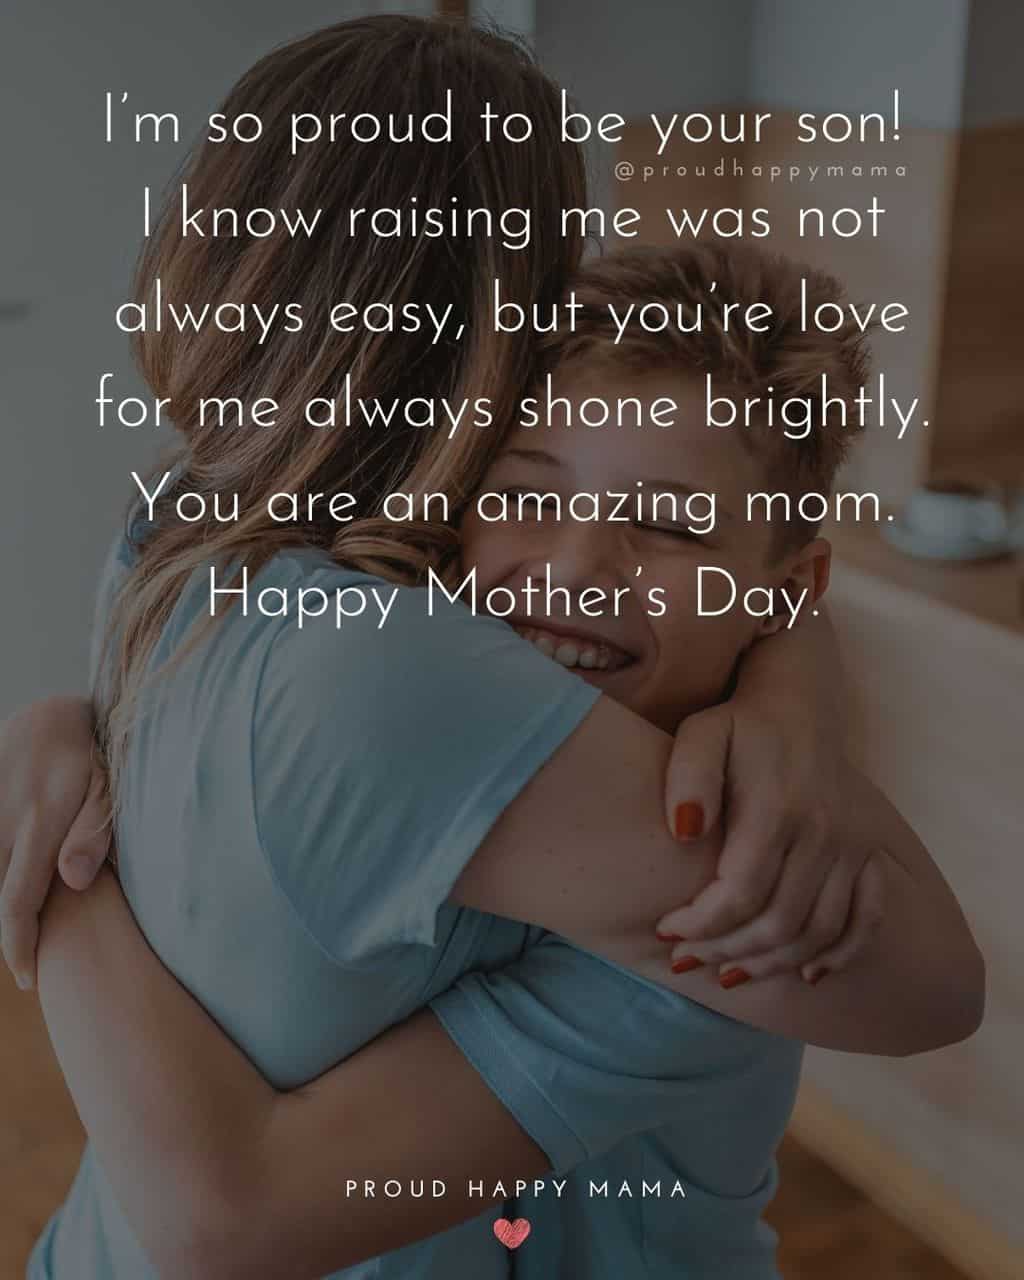 Happy Mothers Day Quotes From Son - I’m so proud to be your son! I know raising me was not always easy, but you’re love for